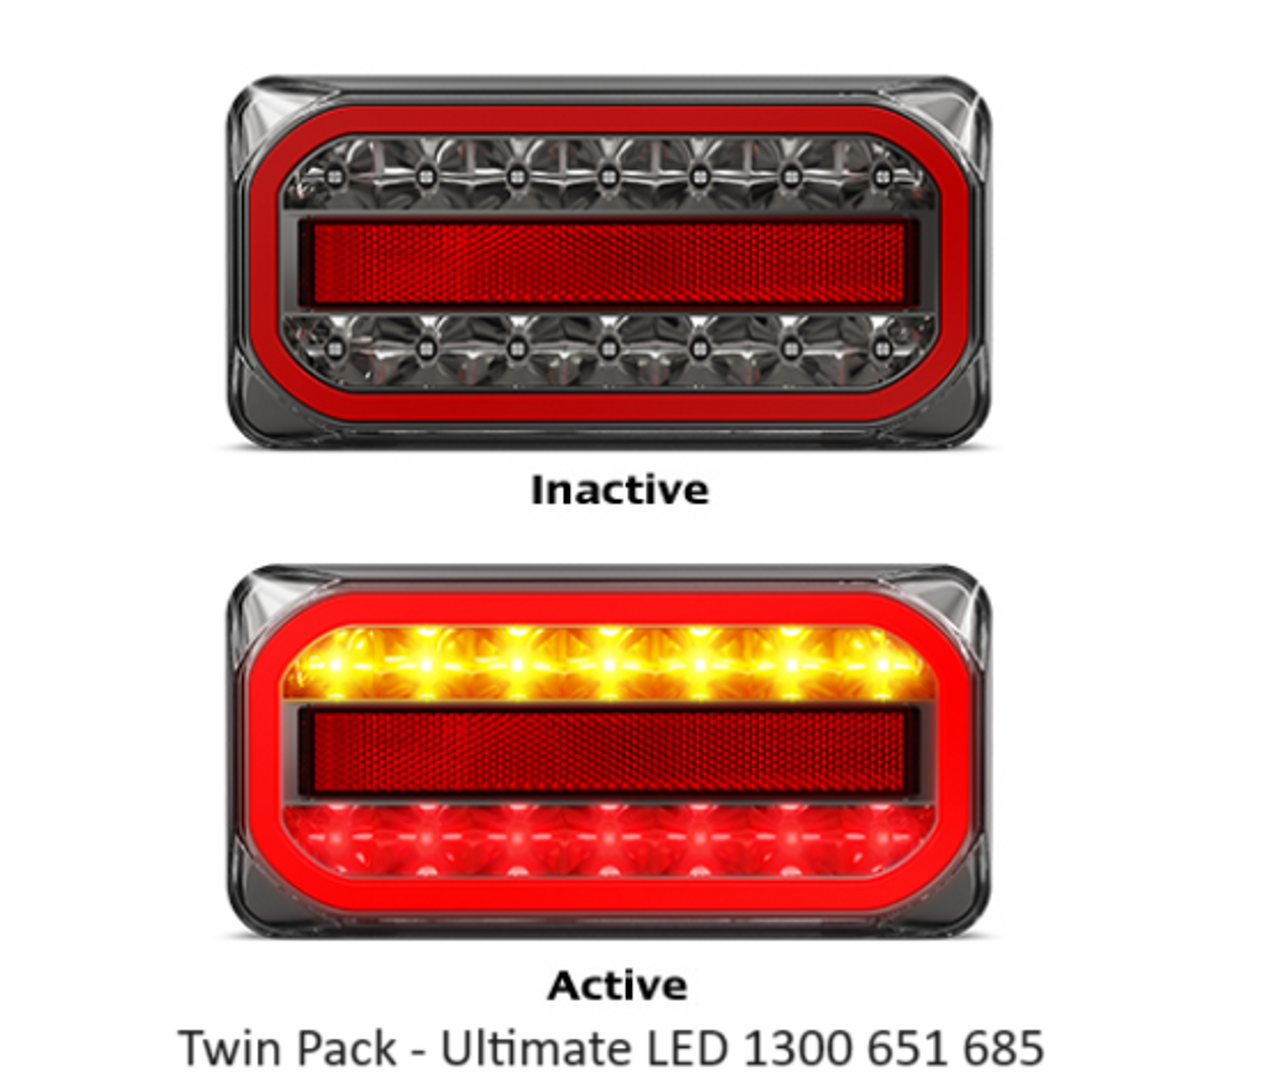 A215ARLP2. Submersible Boat trailer taillight kit with 400mm lead on each light. 5 year warranty